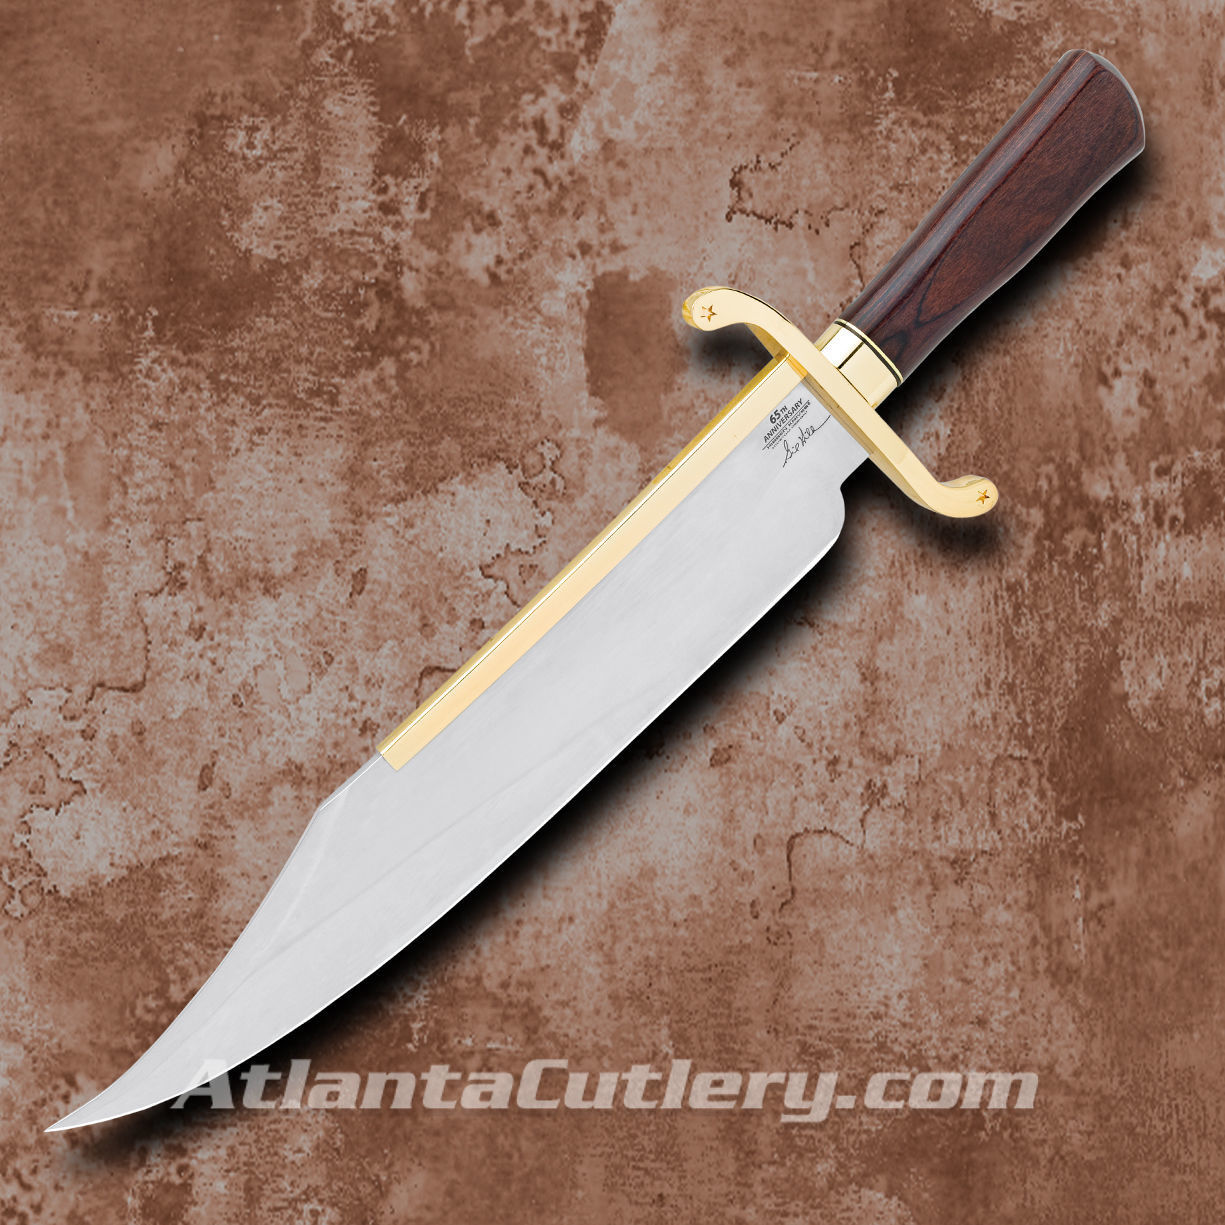 Gil Hibben 65th Anniversary Old West Bowie Knife has stainless steel clip point blade, gold-plated blade catcher, leather sheath